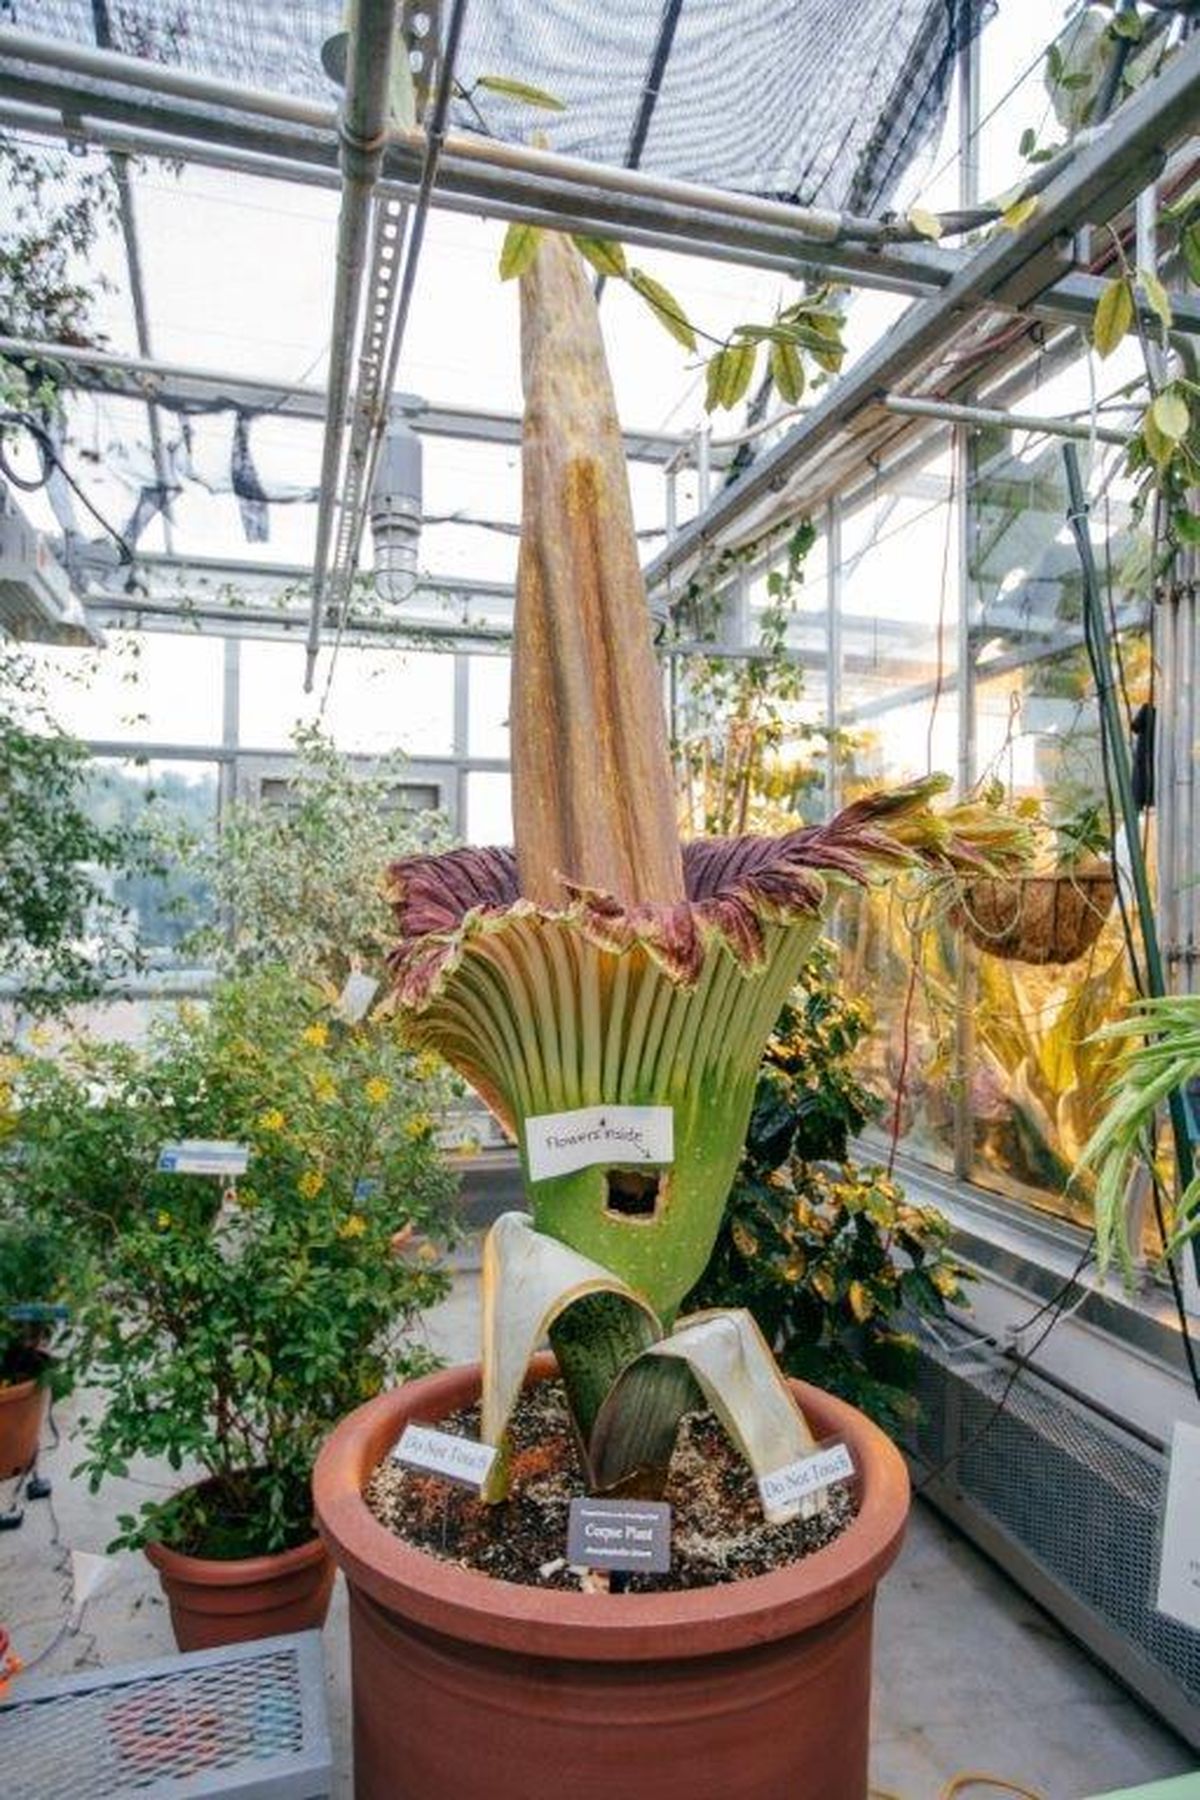 In this photo taken Sept. 24, 2016, Morphy, a “corpse flower” in full bloom at Dartmouth College in Hanover, N.H. The rare “corpse flower” that gets its nickname from its putrid smell is expected to bloom next week at Dartmouth College’s greenhouse. (AP)